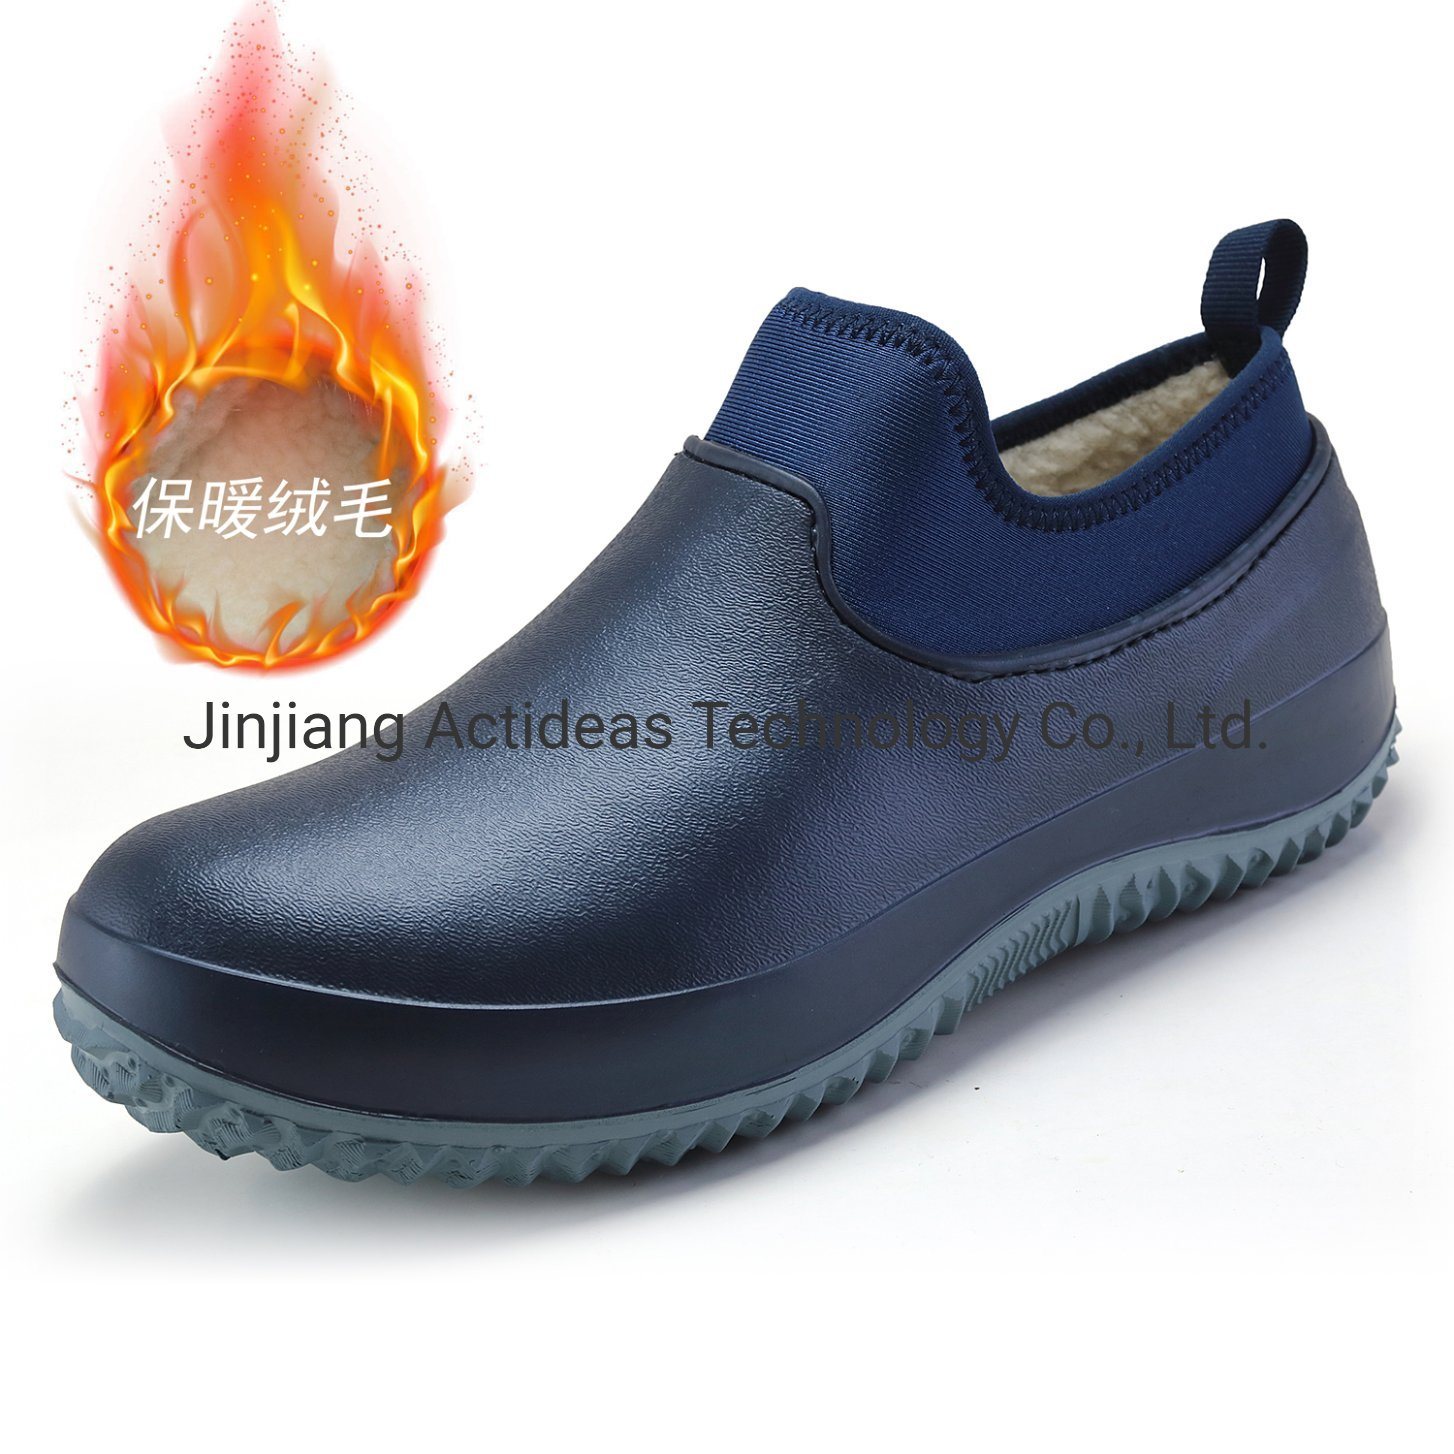 2021 Actideas Cold Winter Shoes Cotton Leather Footwear Sneaker Shoes